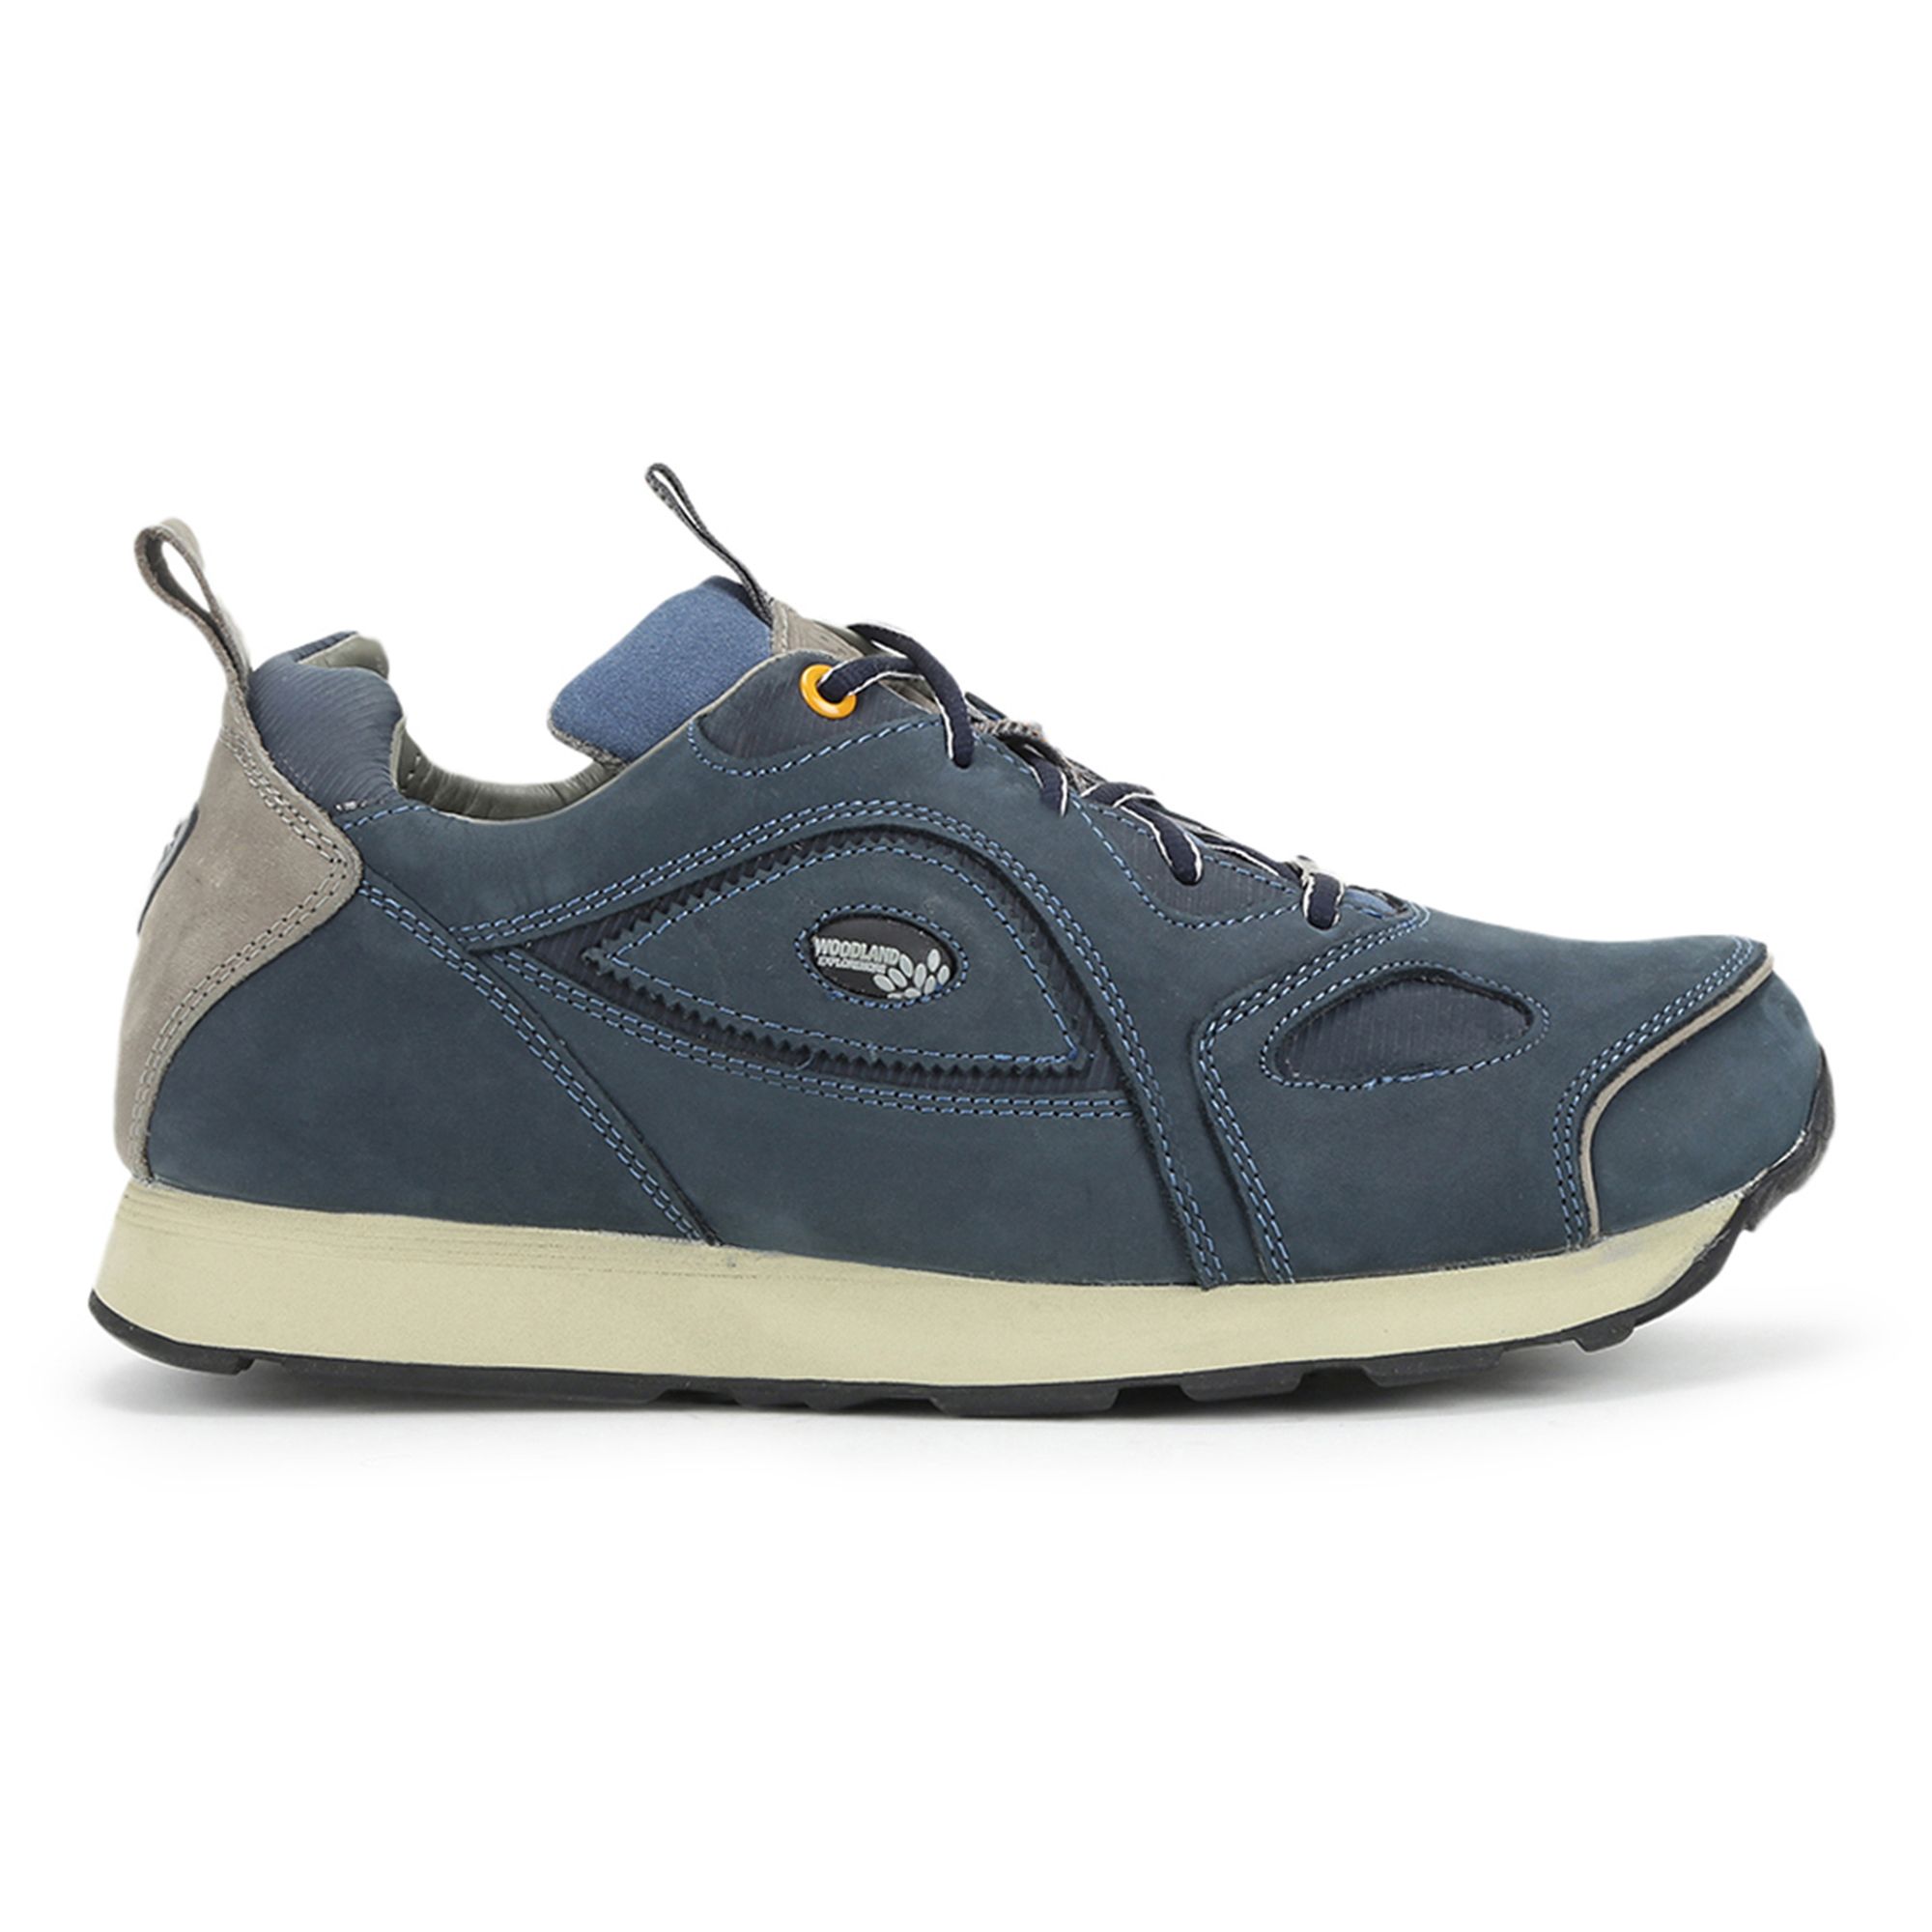 Tomlins Men's Leather Low Top Sneakers - Navy Blue | 51 Label